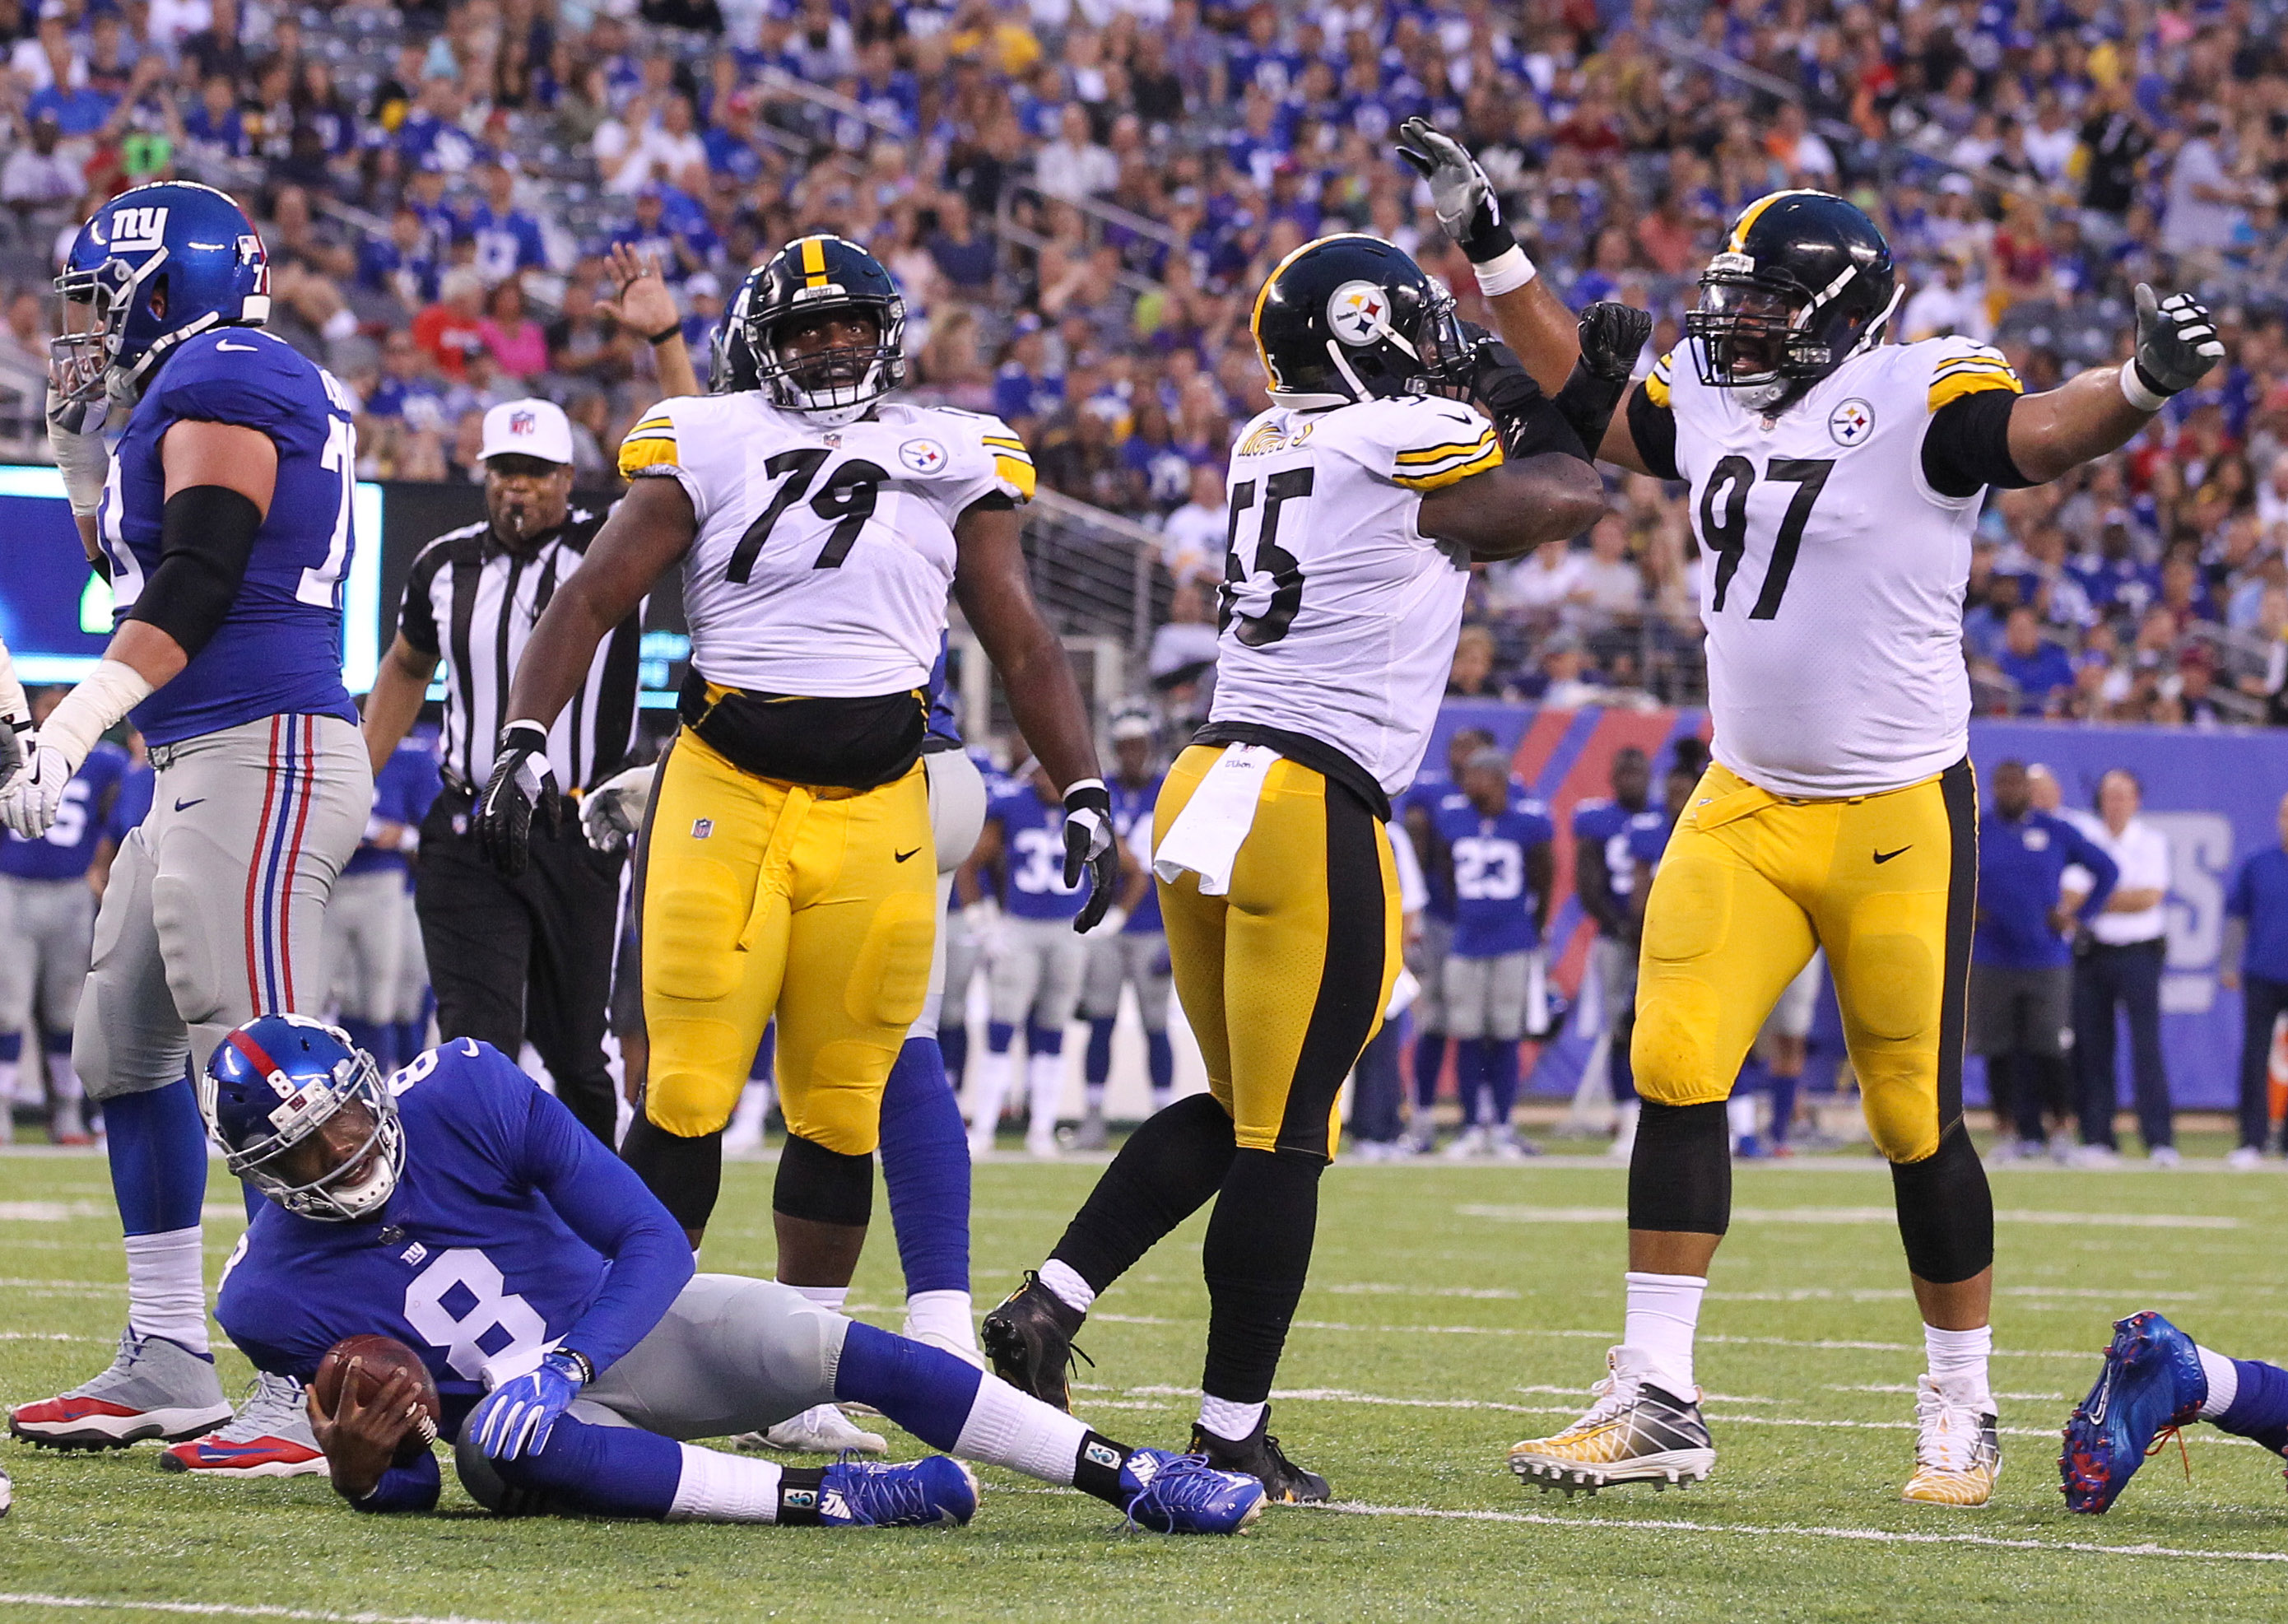 NFL: Pittsburgh Steelers at New York Giants